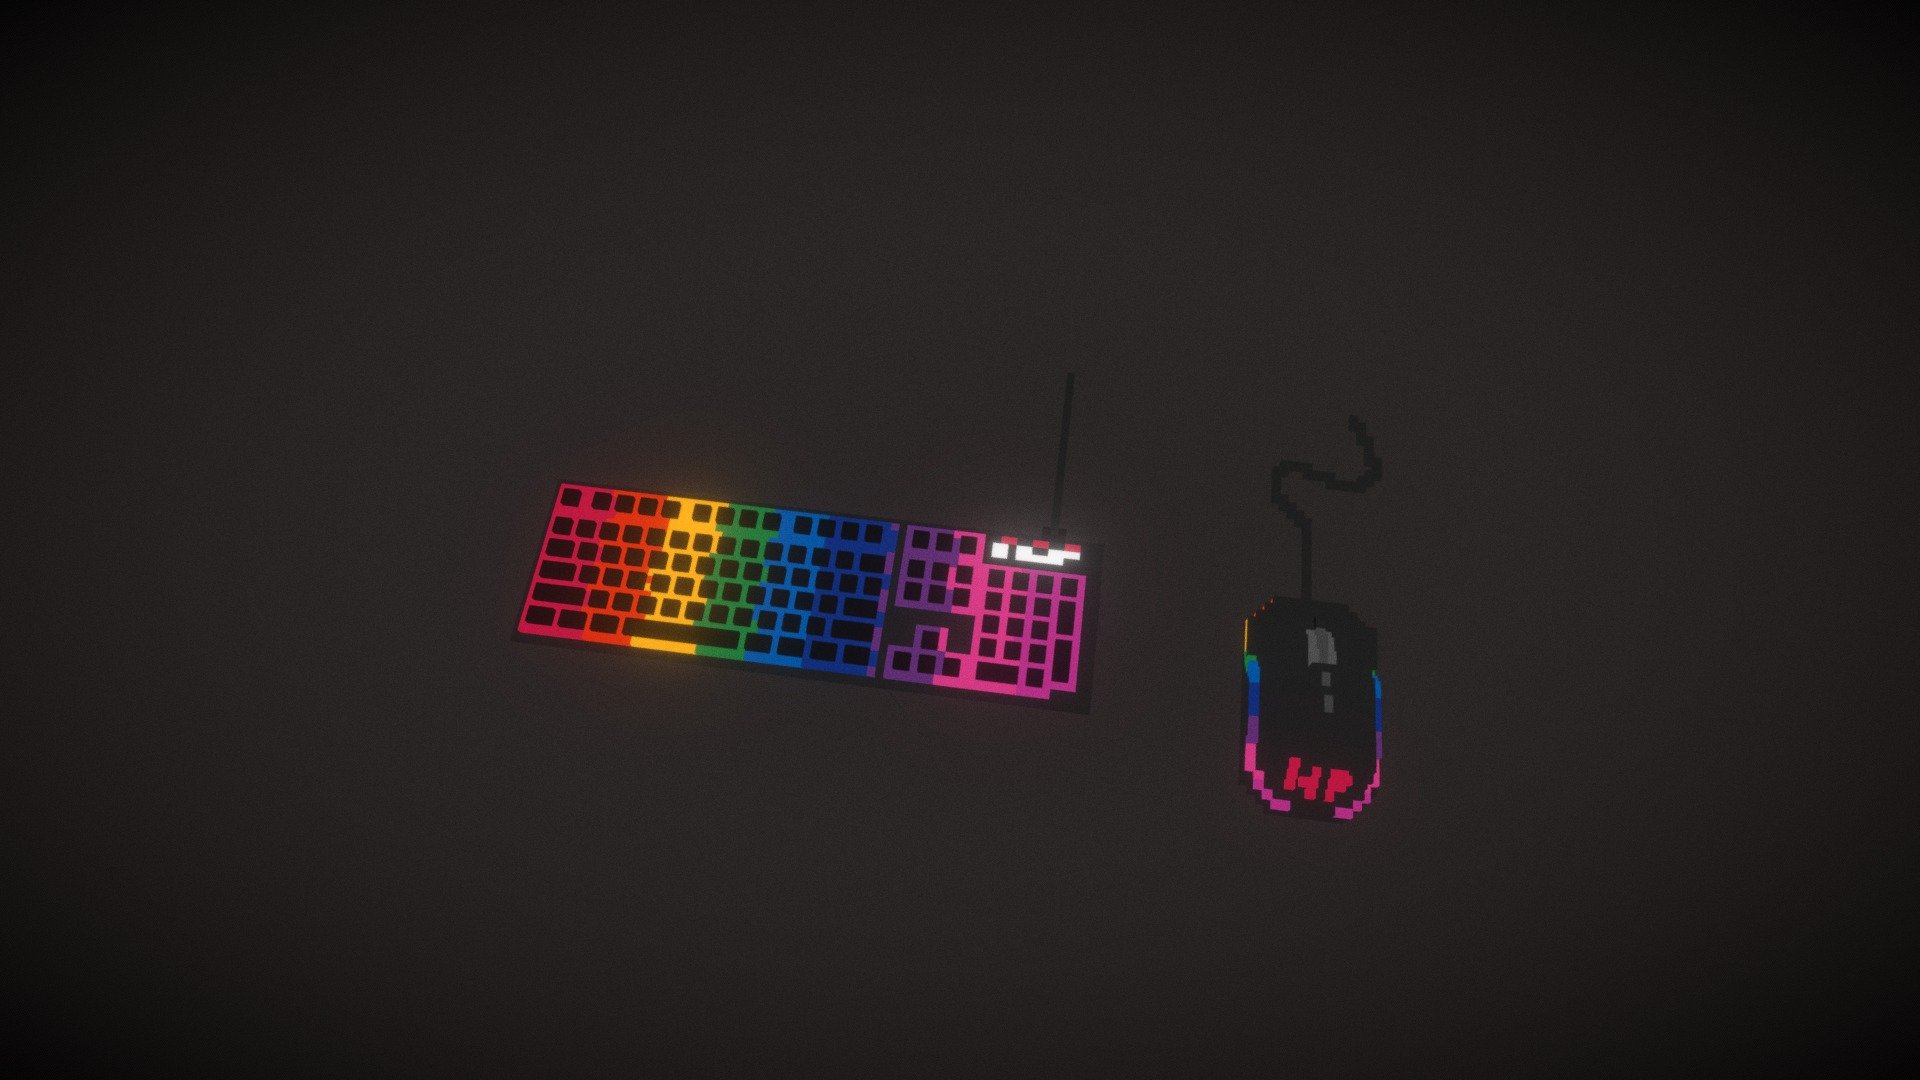 Hyperx Keyboard And Mouse